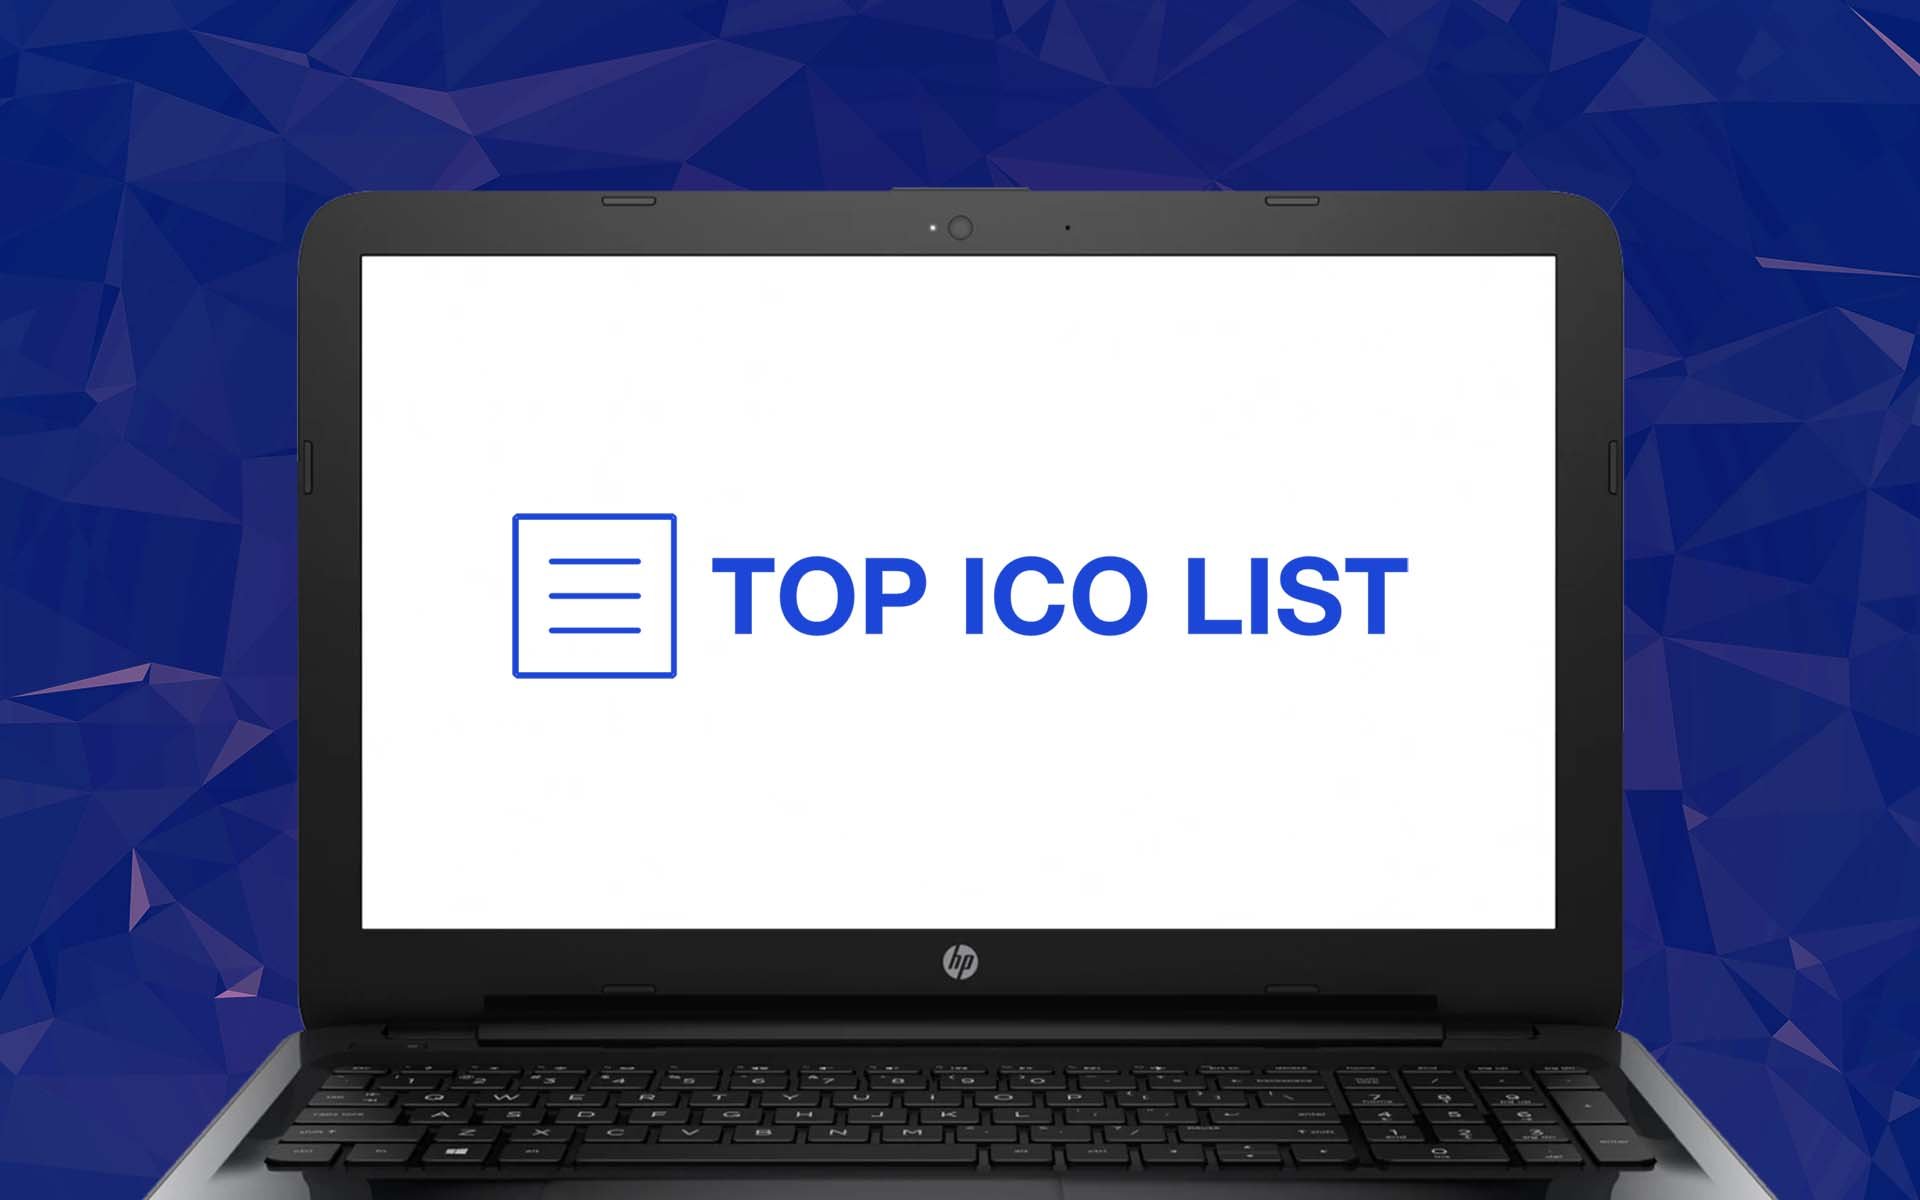 Top ICO List Helps Investors Stay Up to Date on ICOs, Token Sales, and